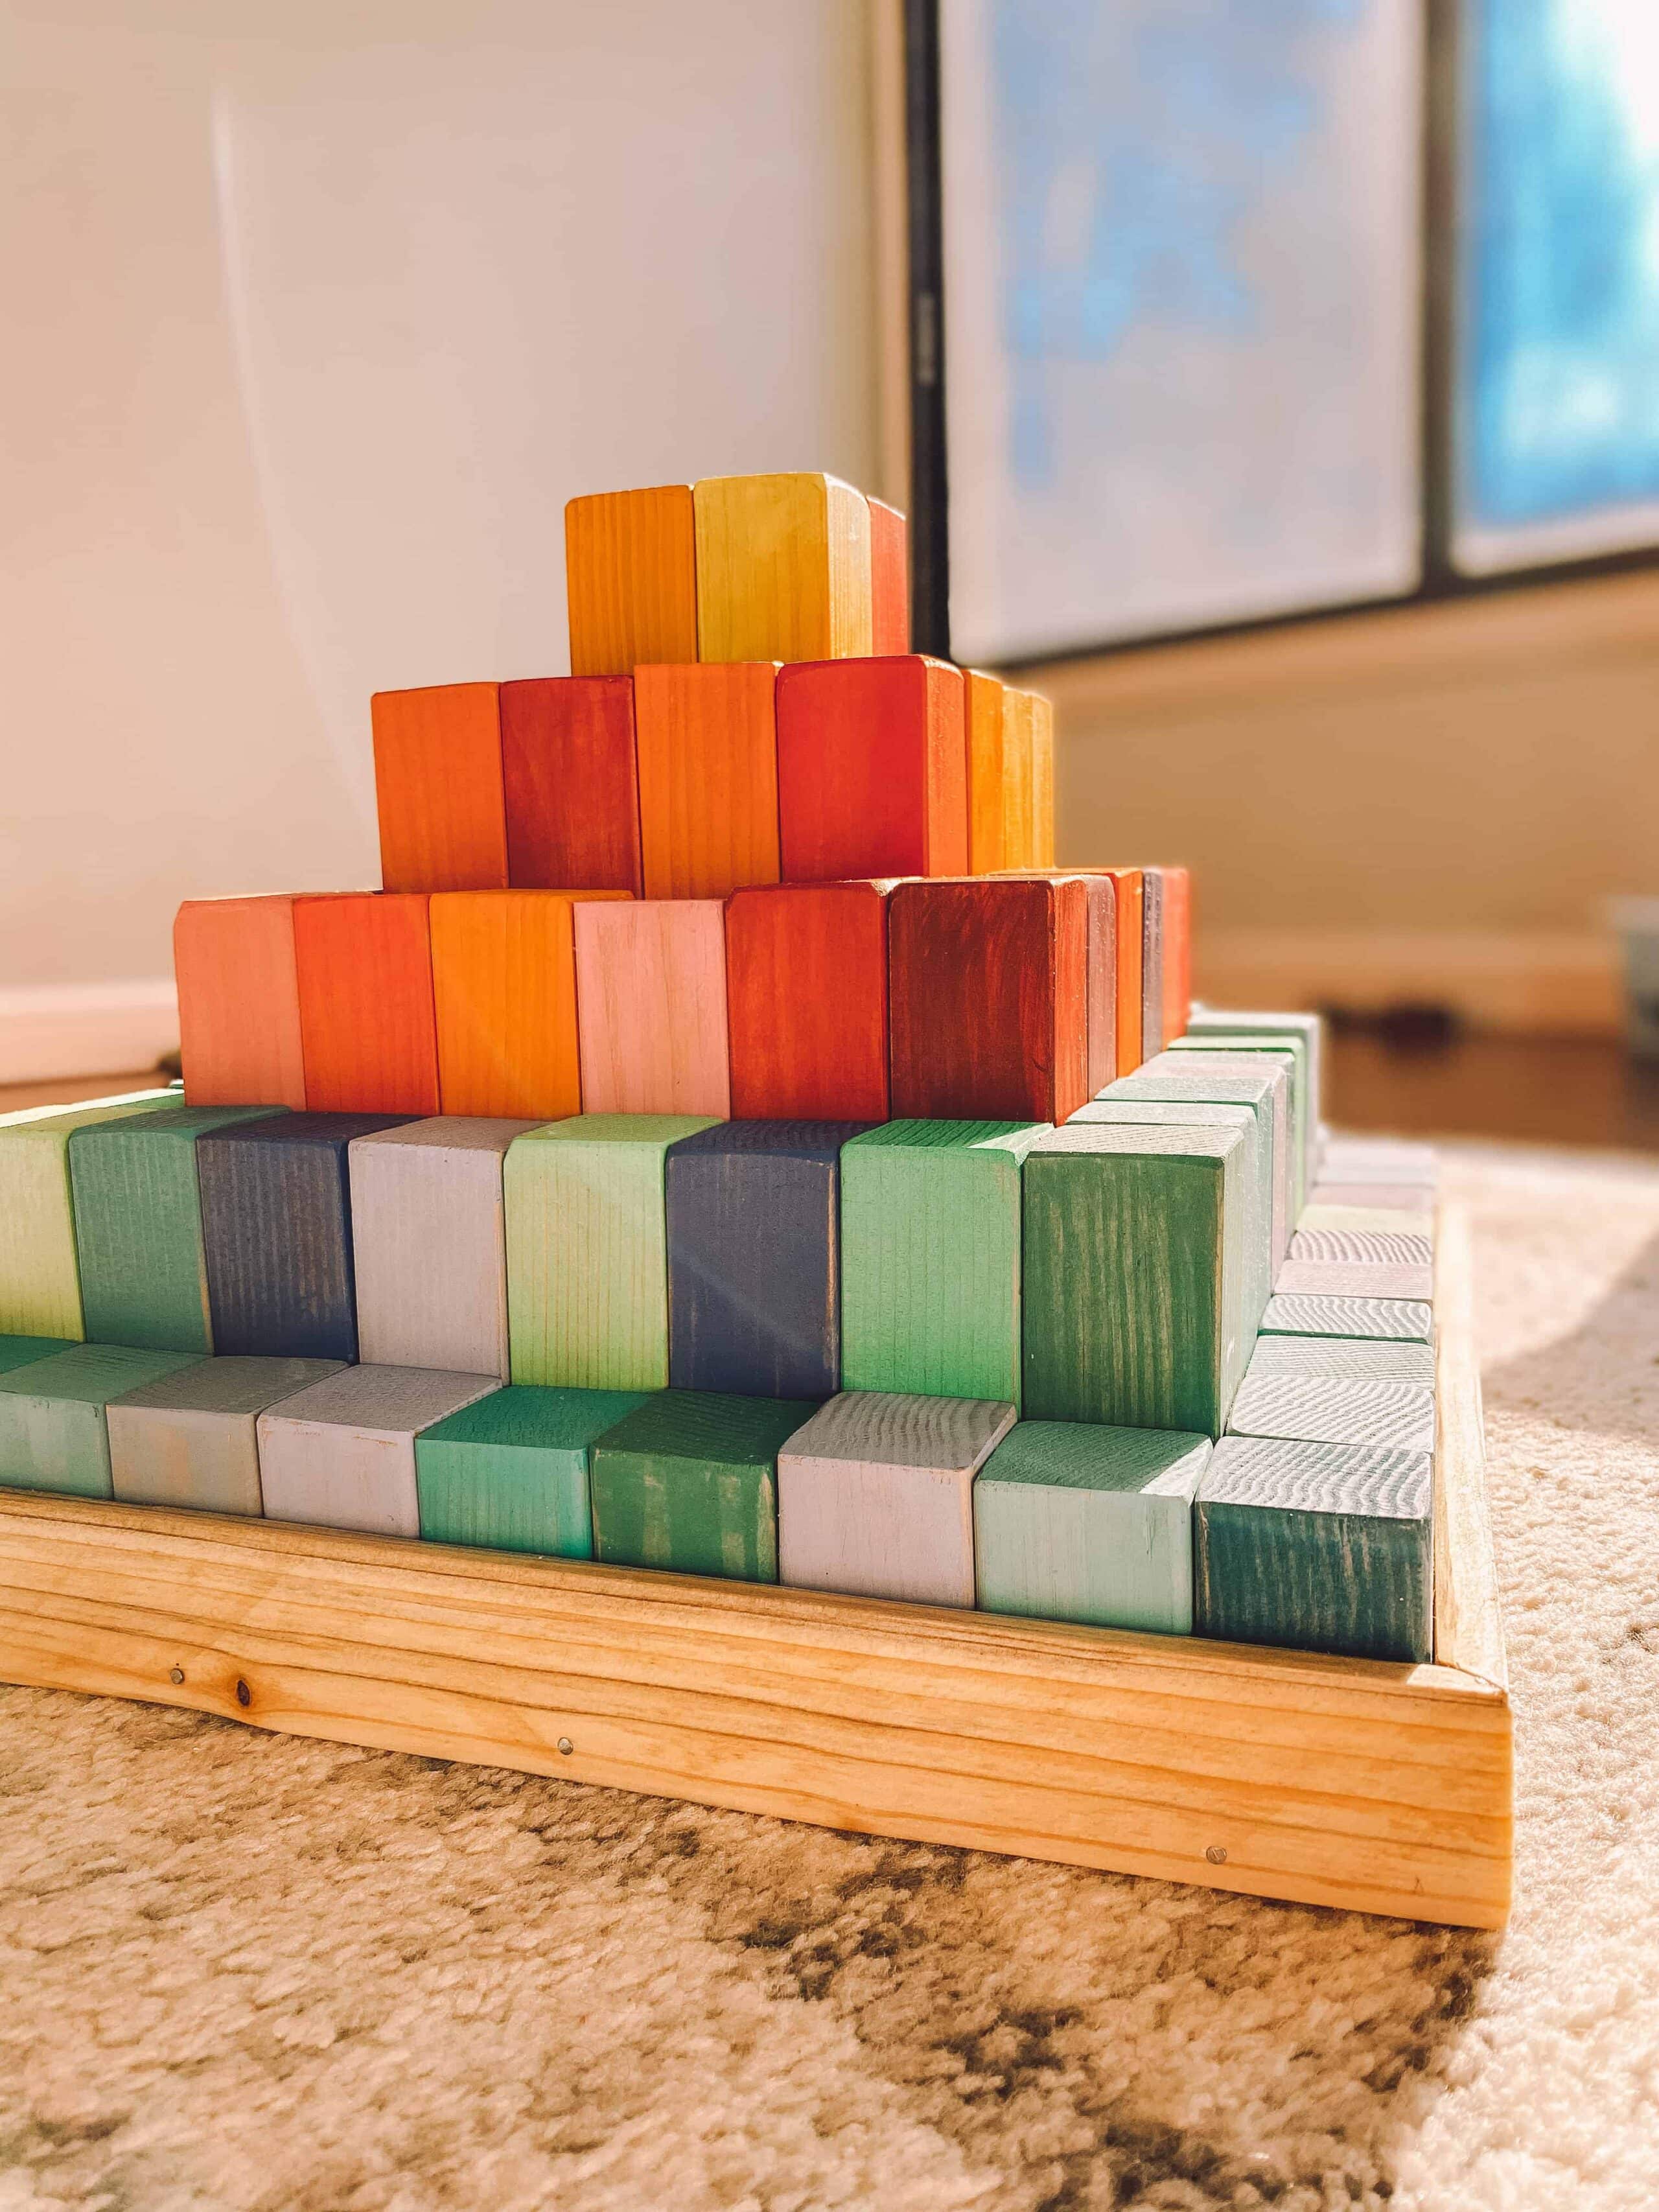 DIY Grimms Large Stepped Pyramid - Make your own amazing wooden Waldorf toys